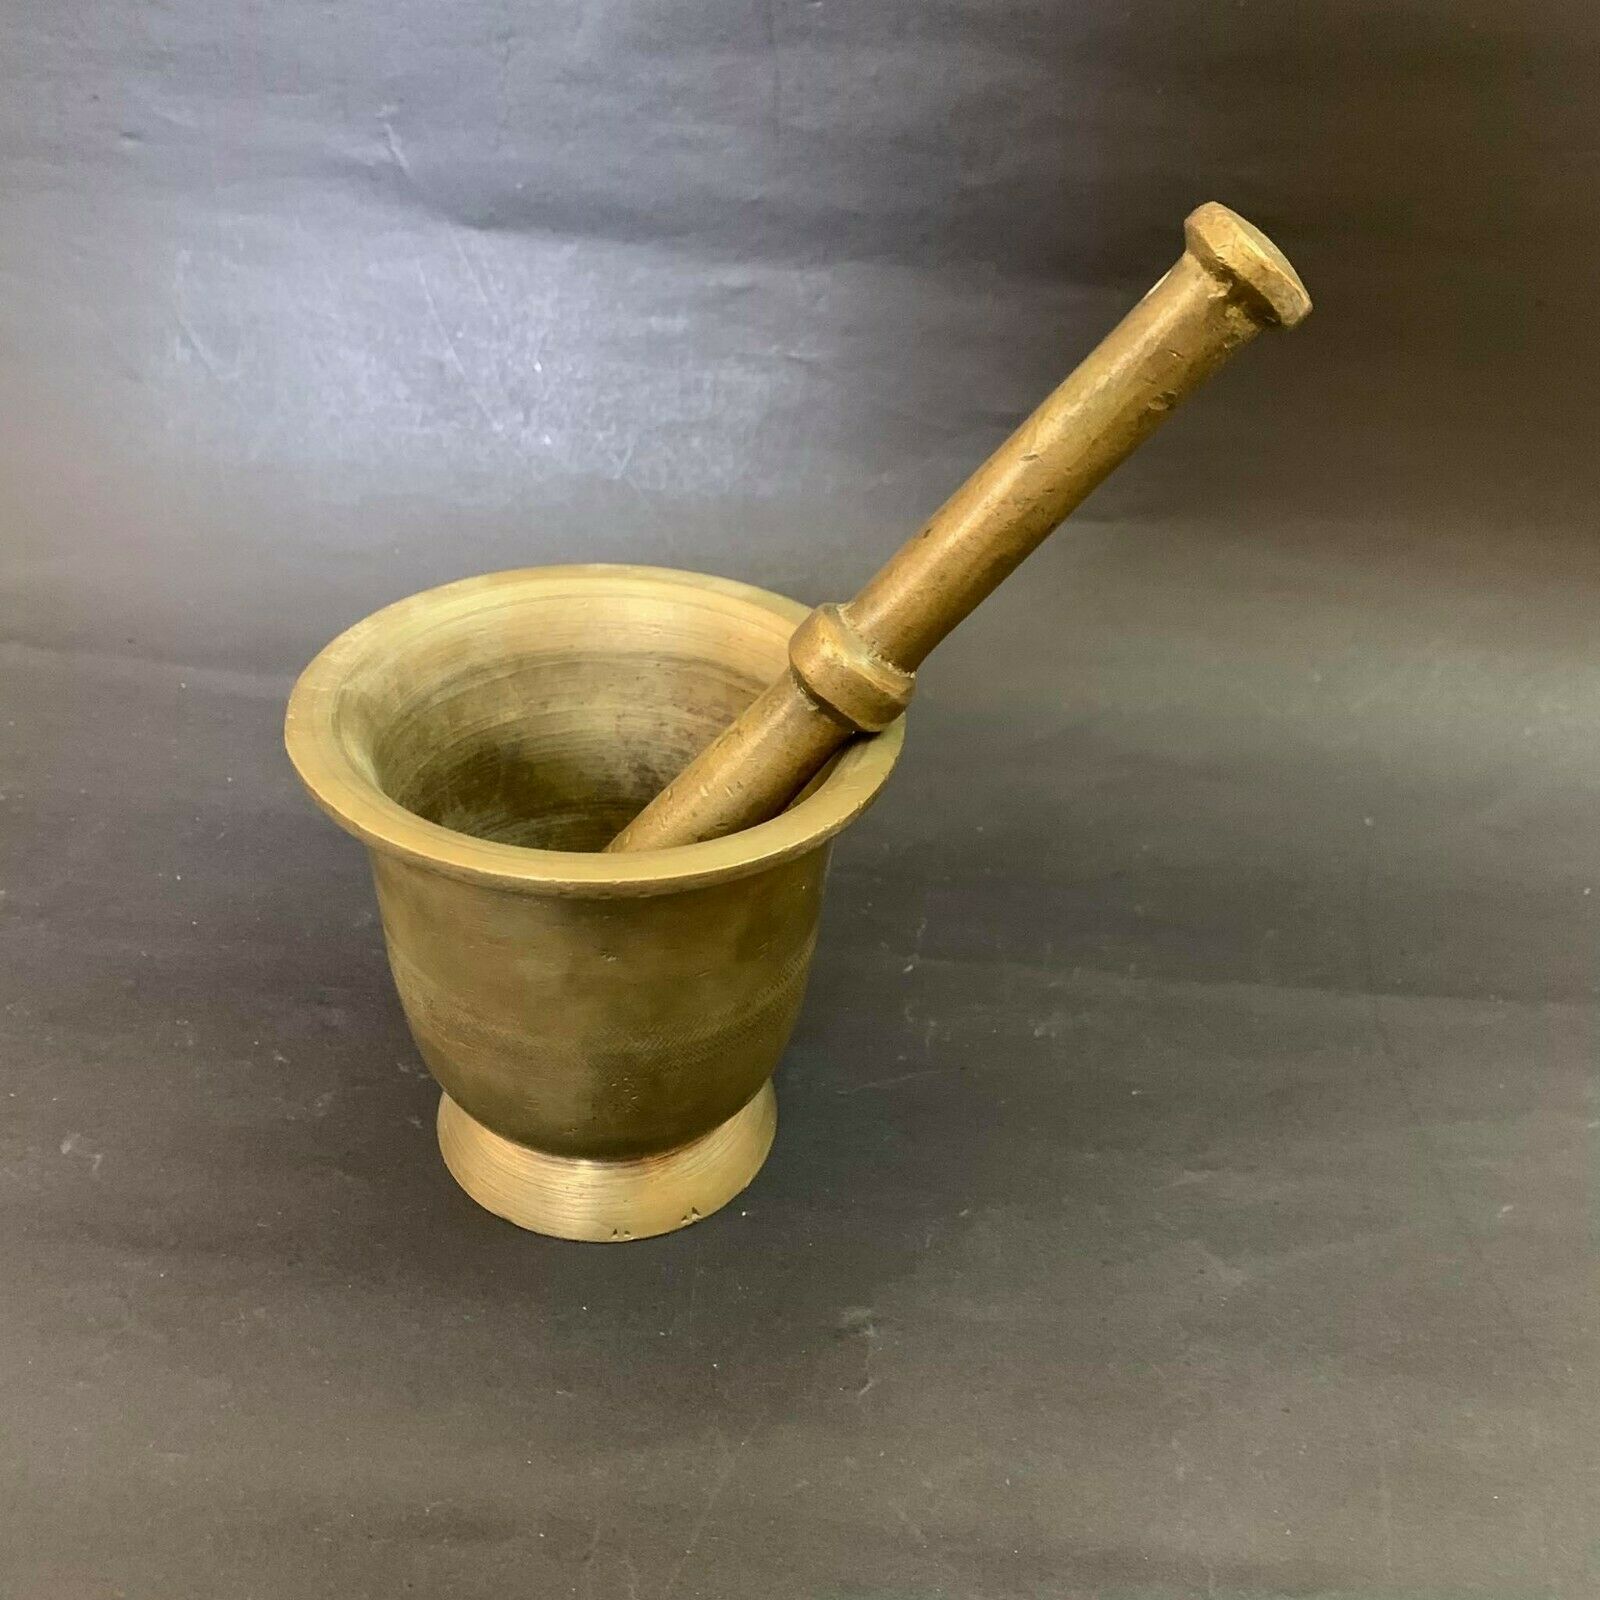 Antique Heavy Large Solid Brass Mortar And Pestle Pharmacy Apothecary 3.9"x3.9"